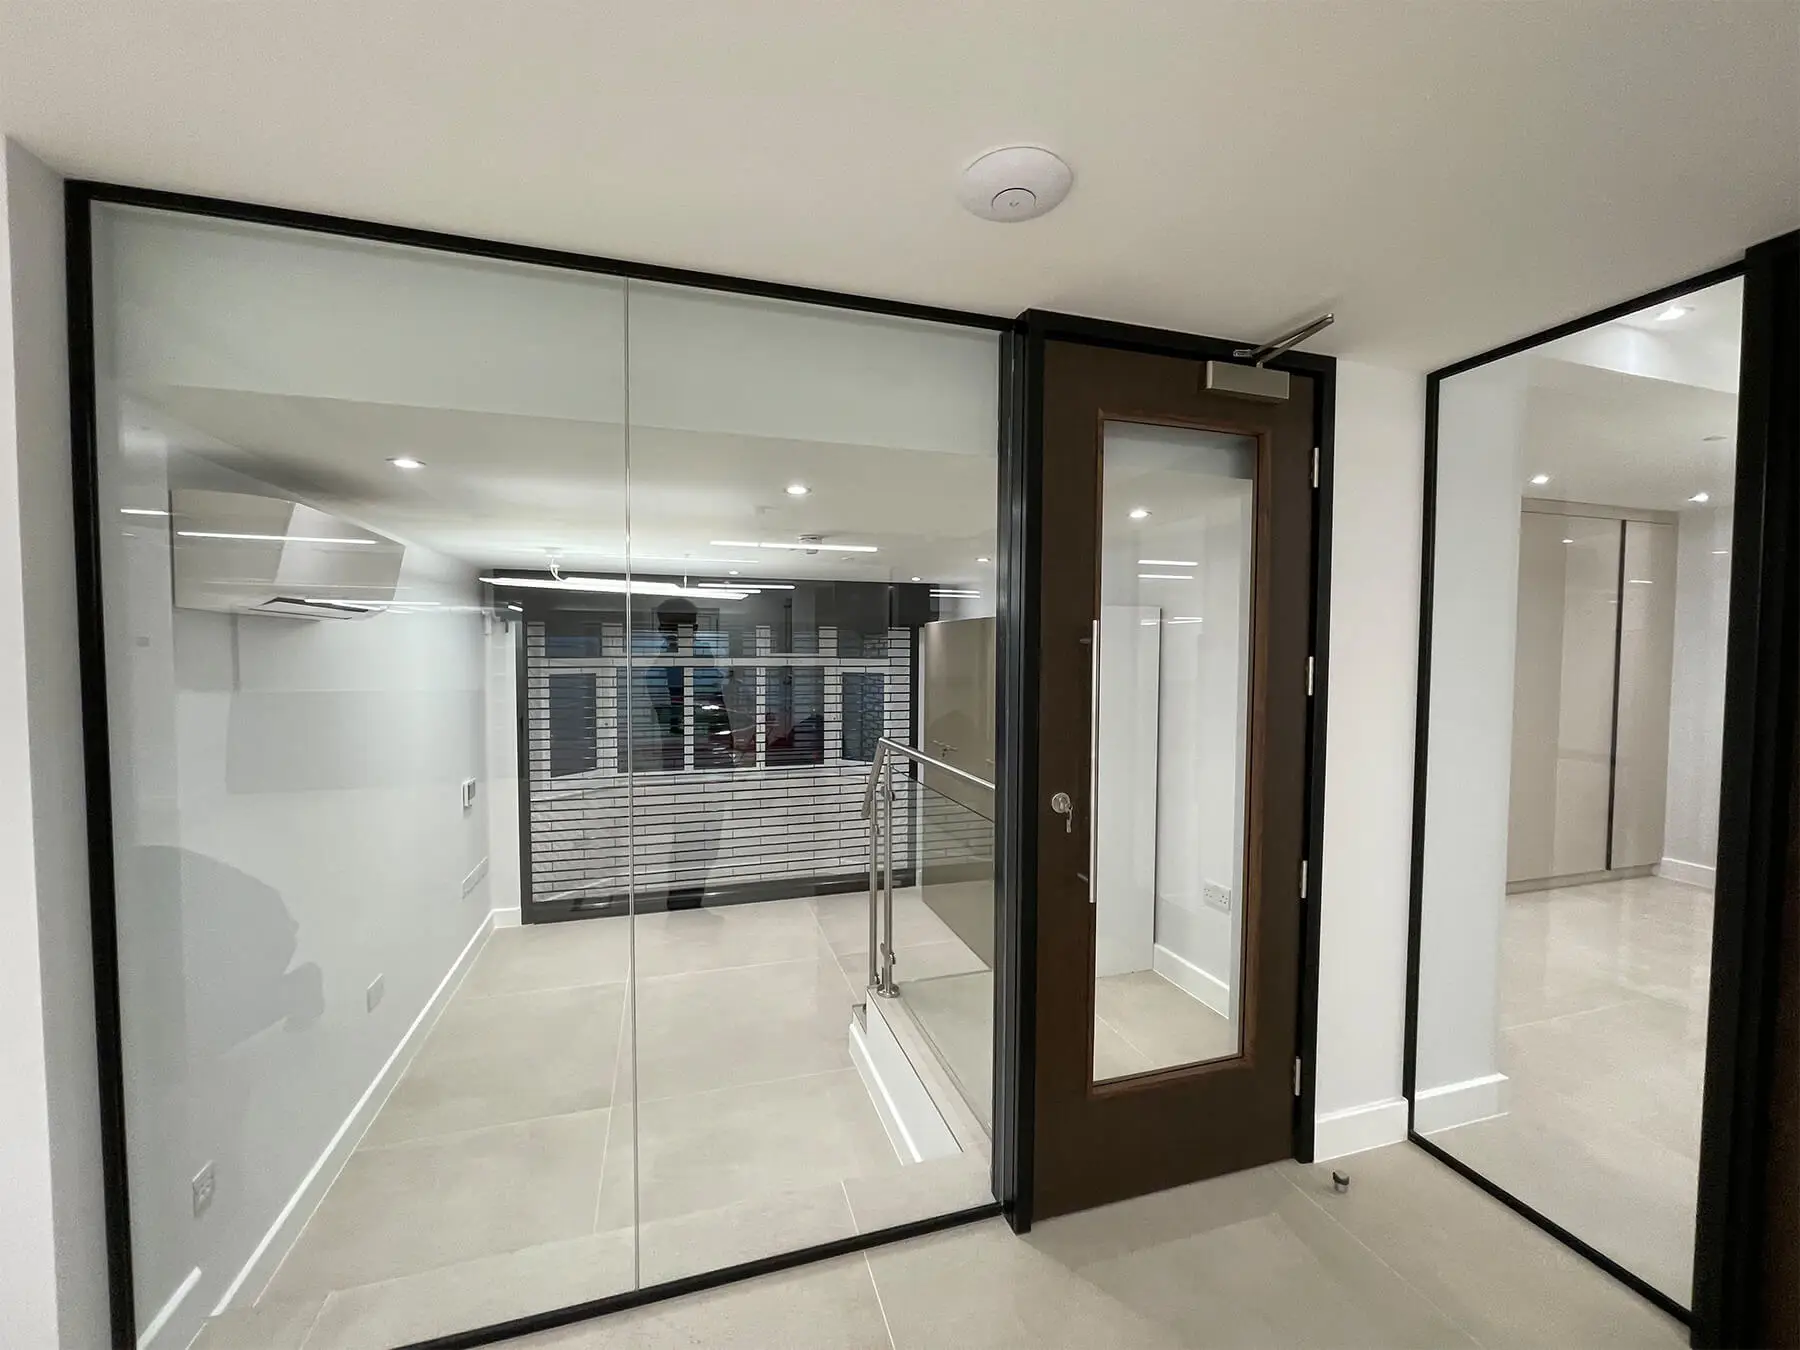 Office spaces divided with single glaze partitions with solid doors